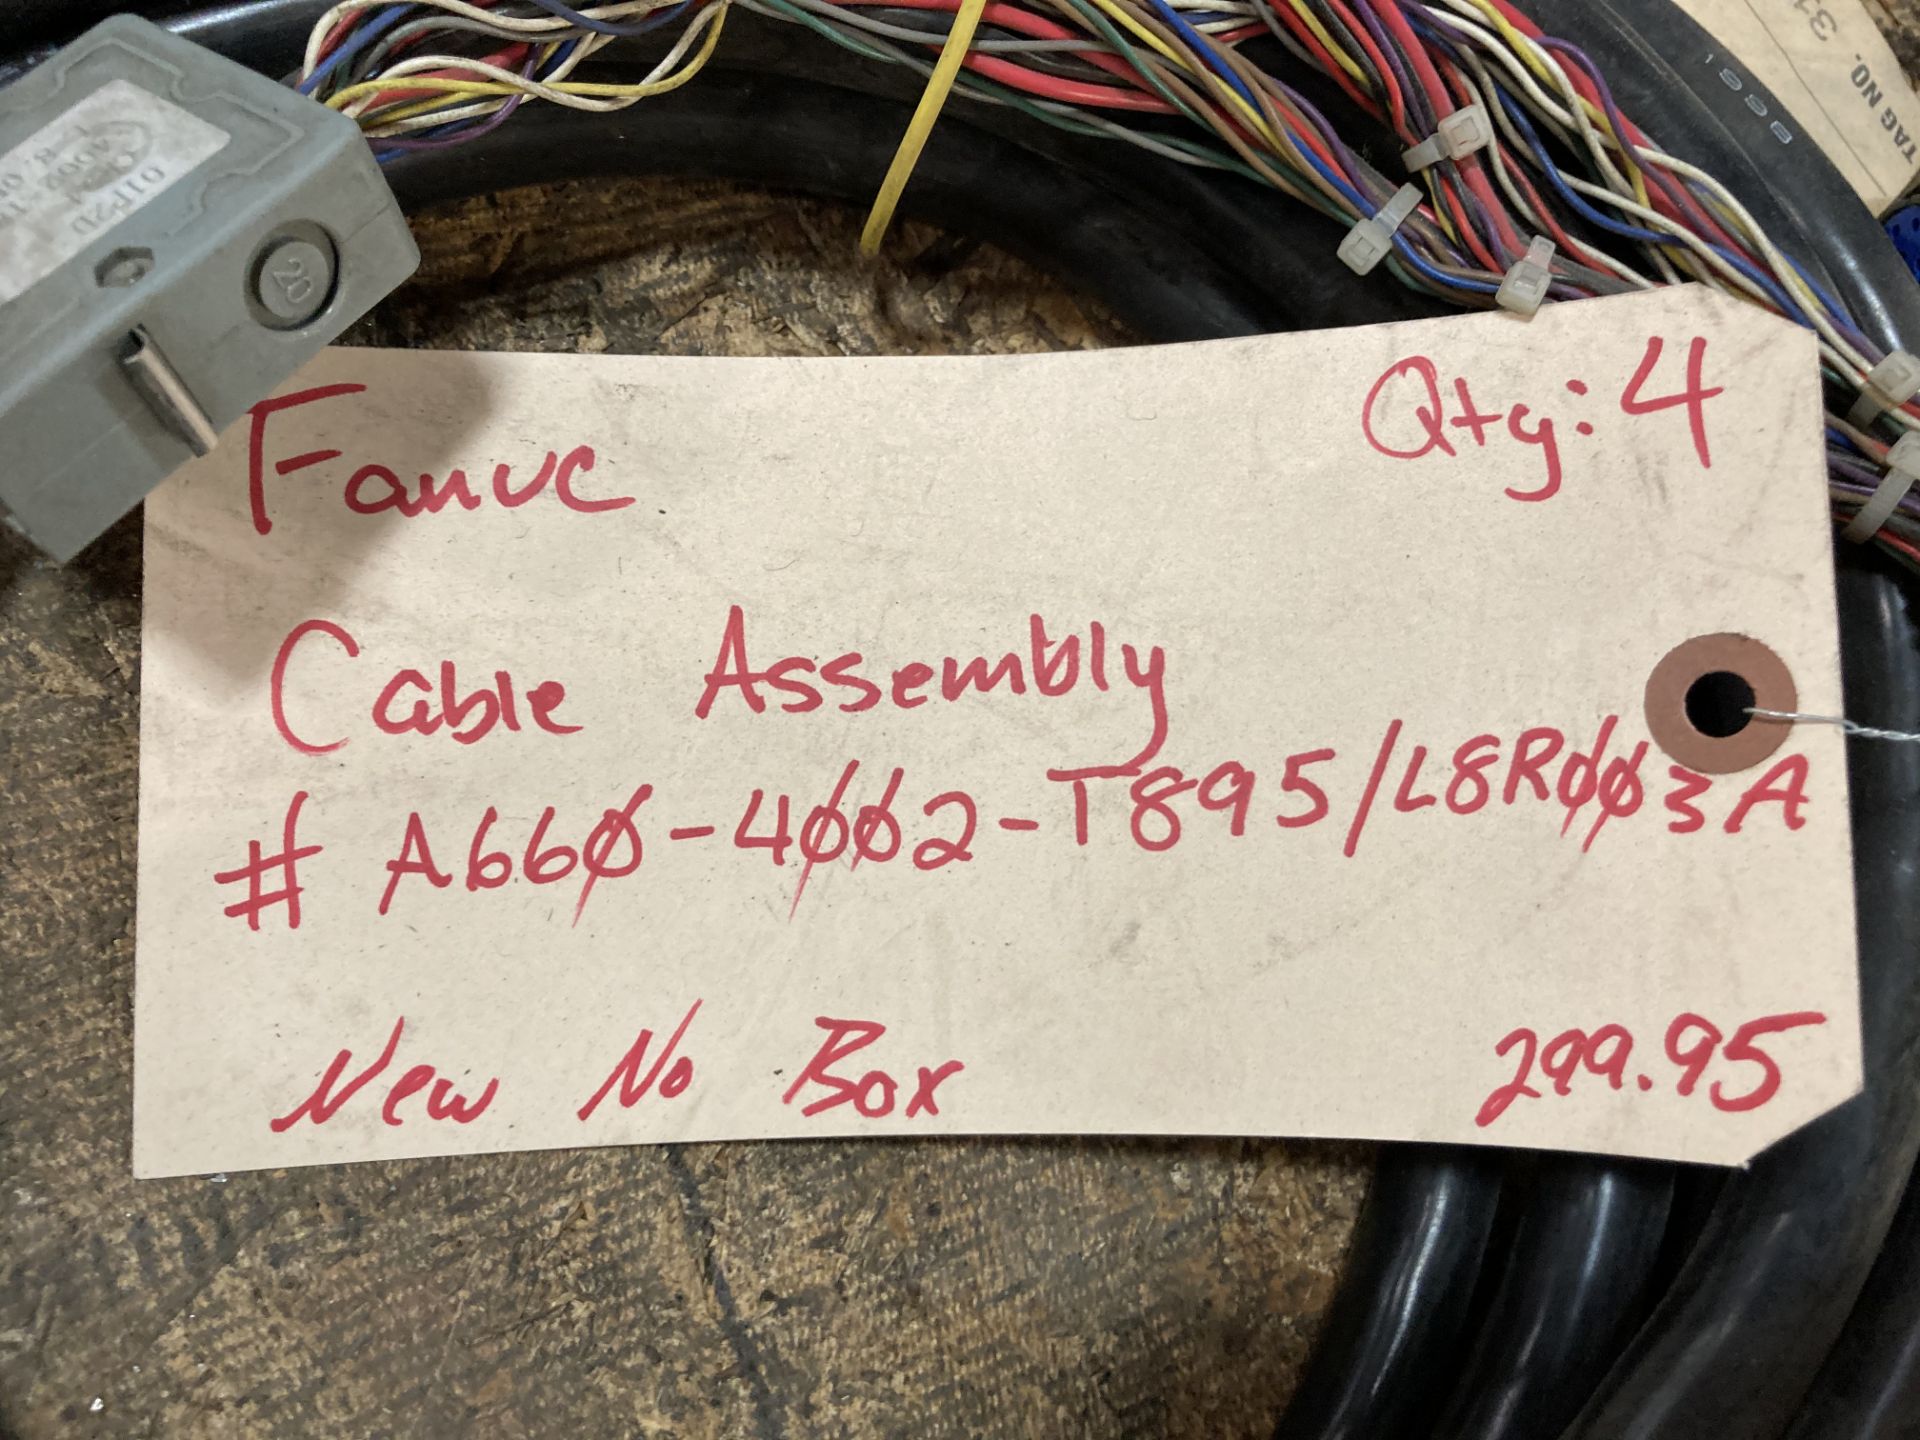 Lot of Fanuc Cable Assemblies - Image 8 of 13